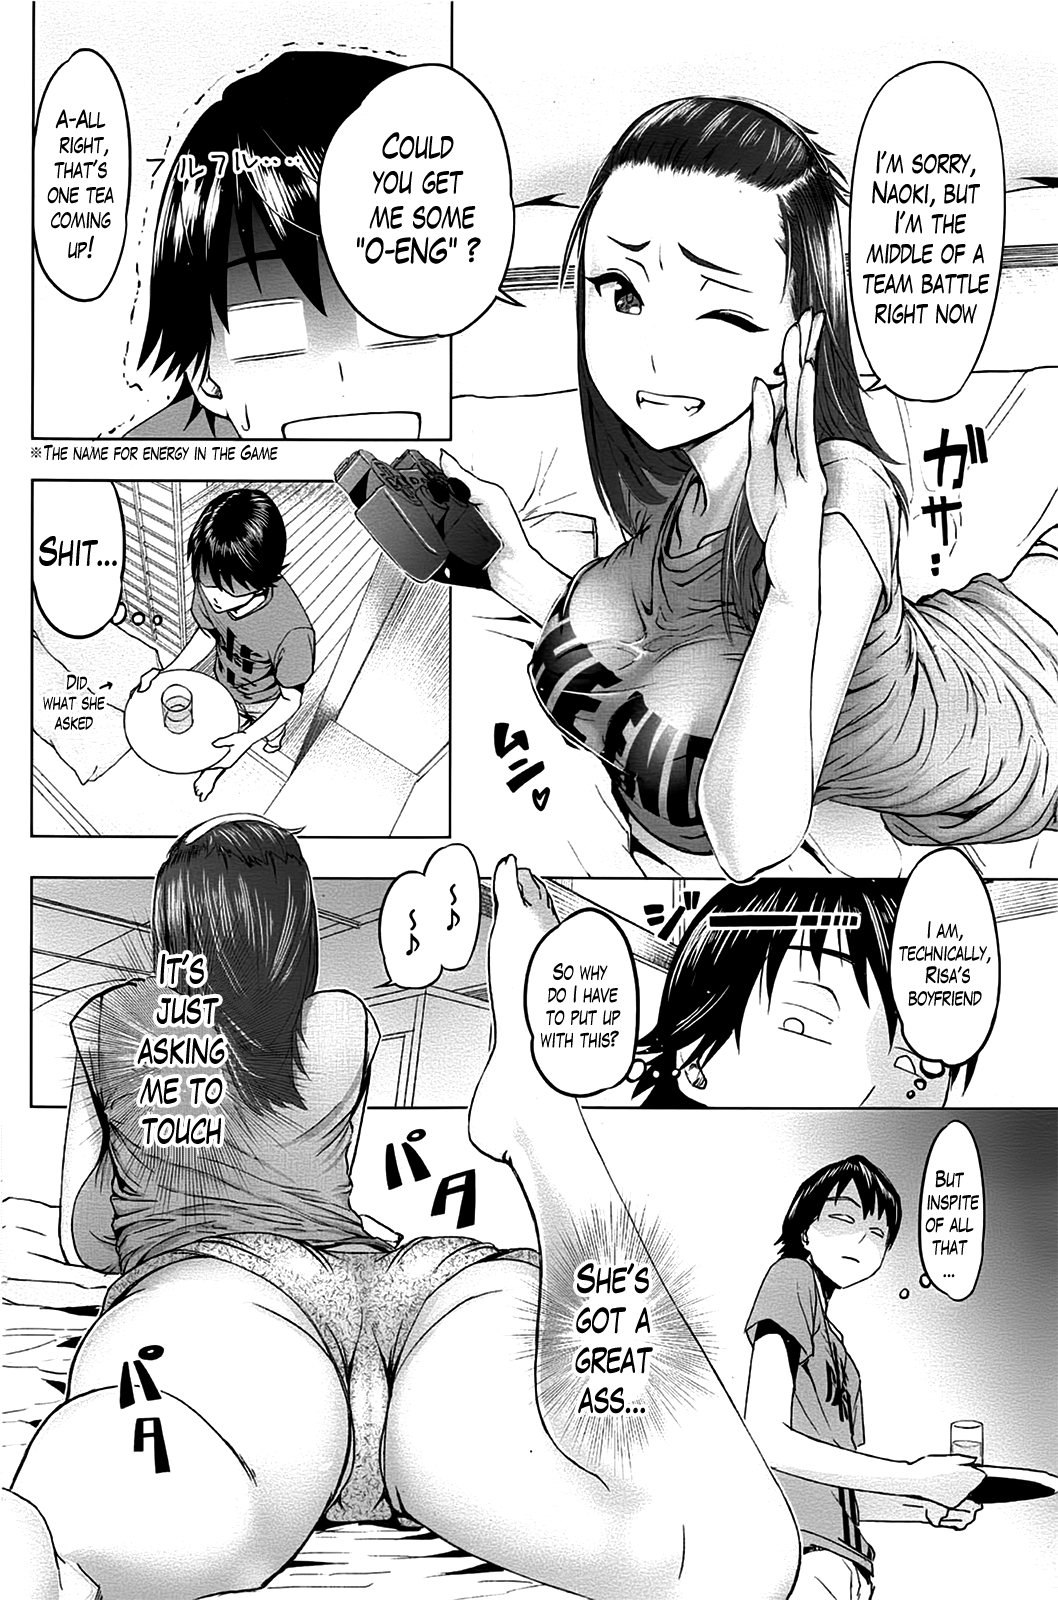 [Magatama] Boku to Kanojo no Offline | Hers and My Offline (COMIC HOTMiLK 2013-11) [English] [The Lusty Lady Project] [マガタマ] 僕と彼女のオフライン (コミックホットミルク 2013年11月号) [英訳]